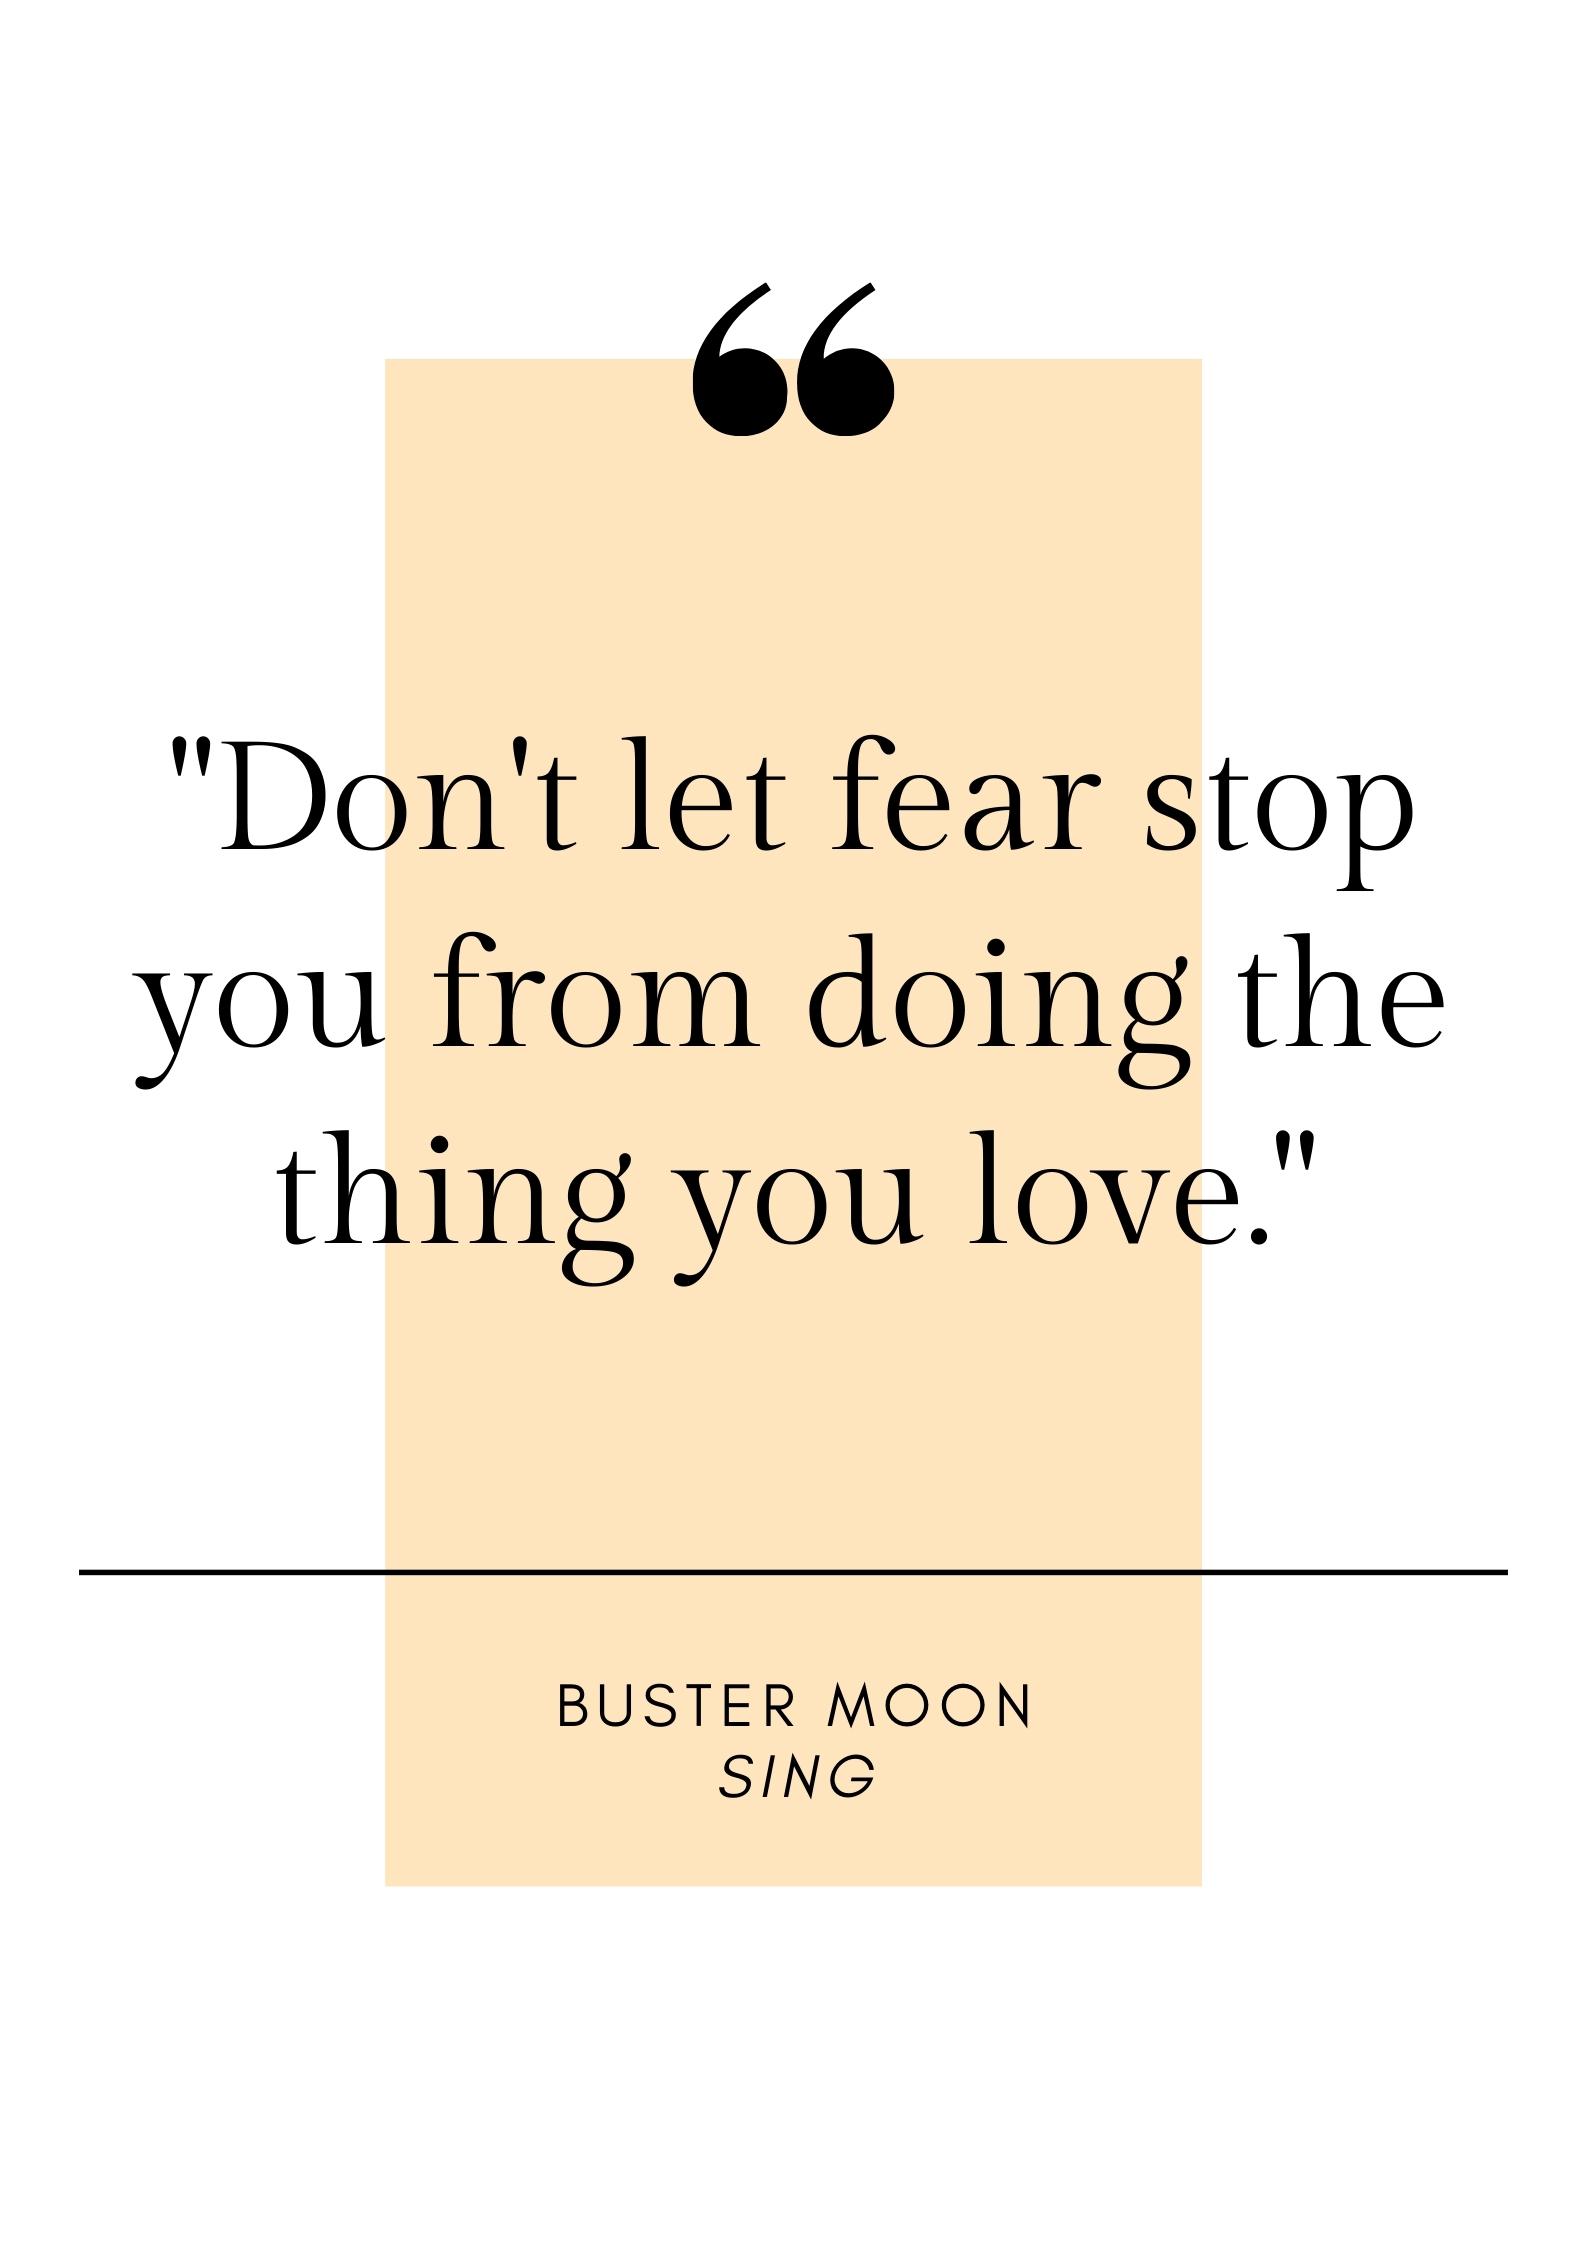 sing movie quote